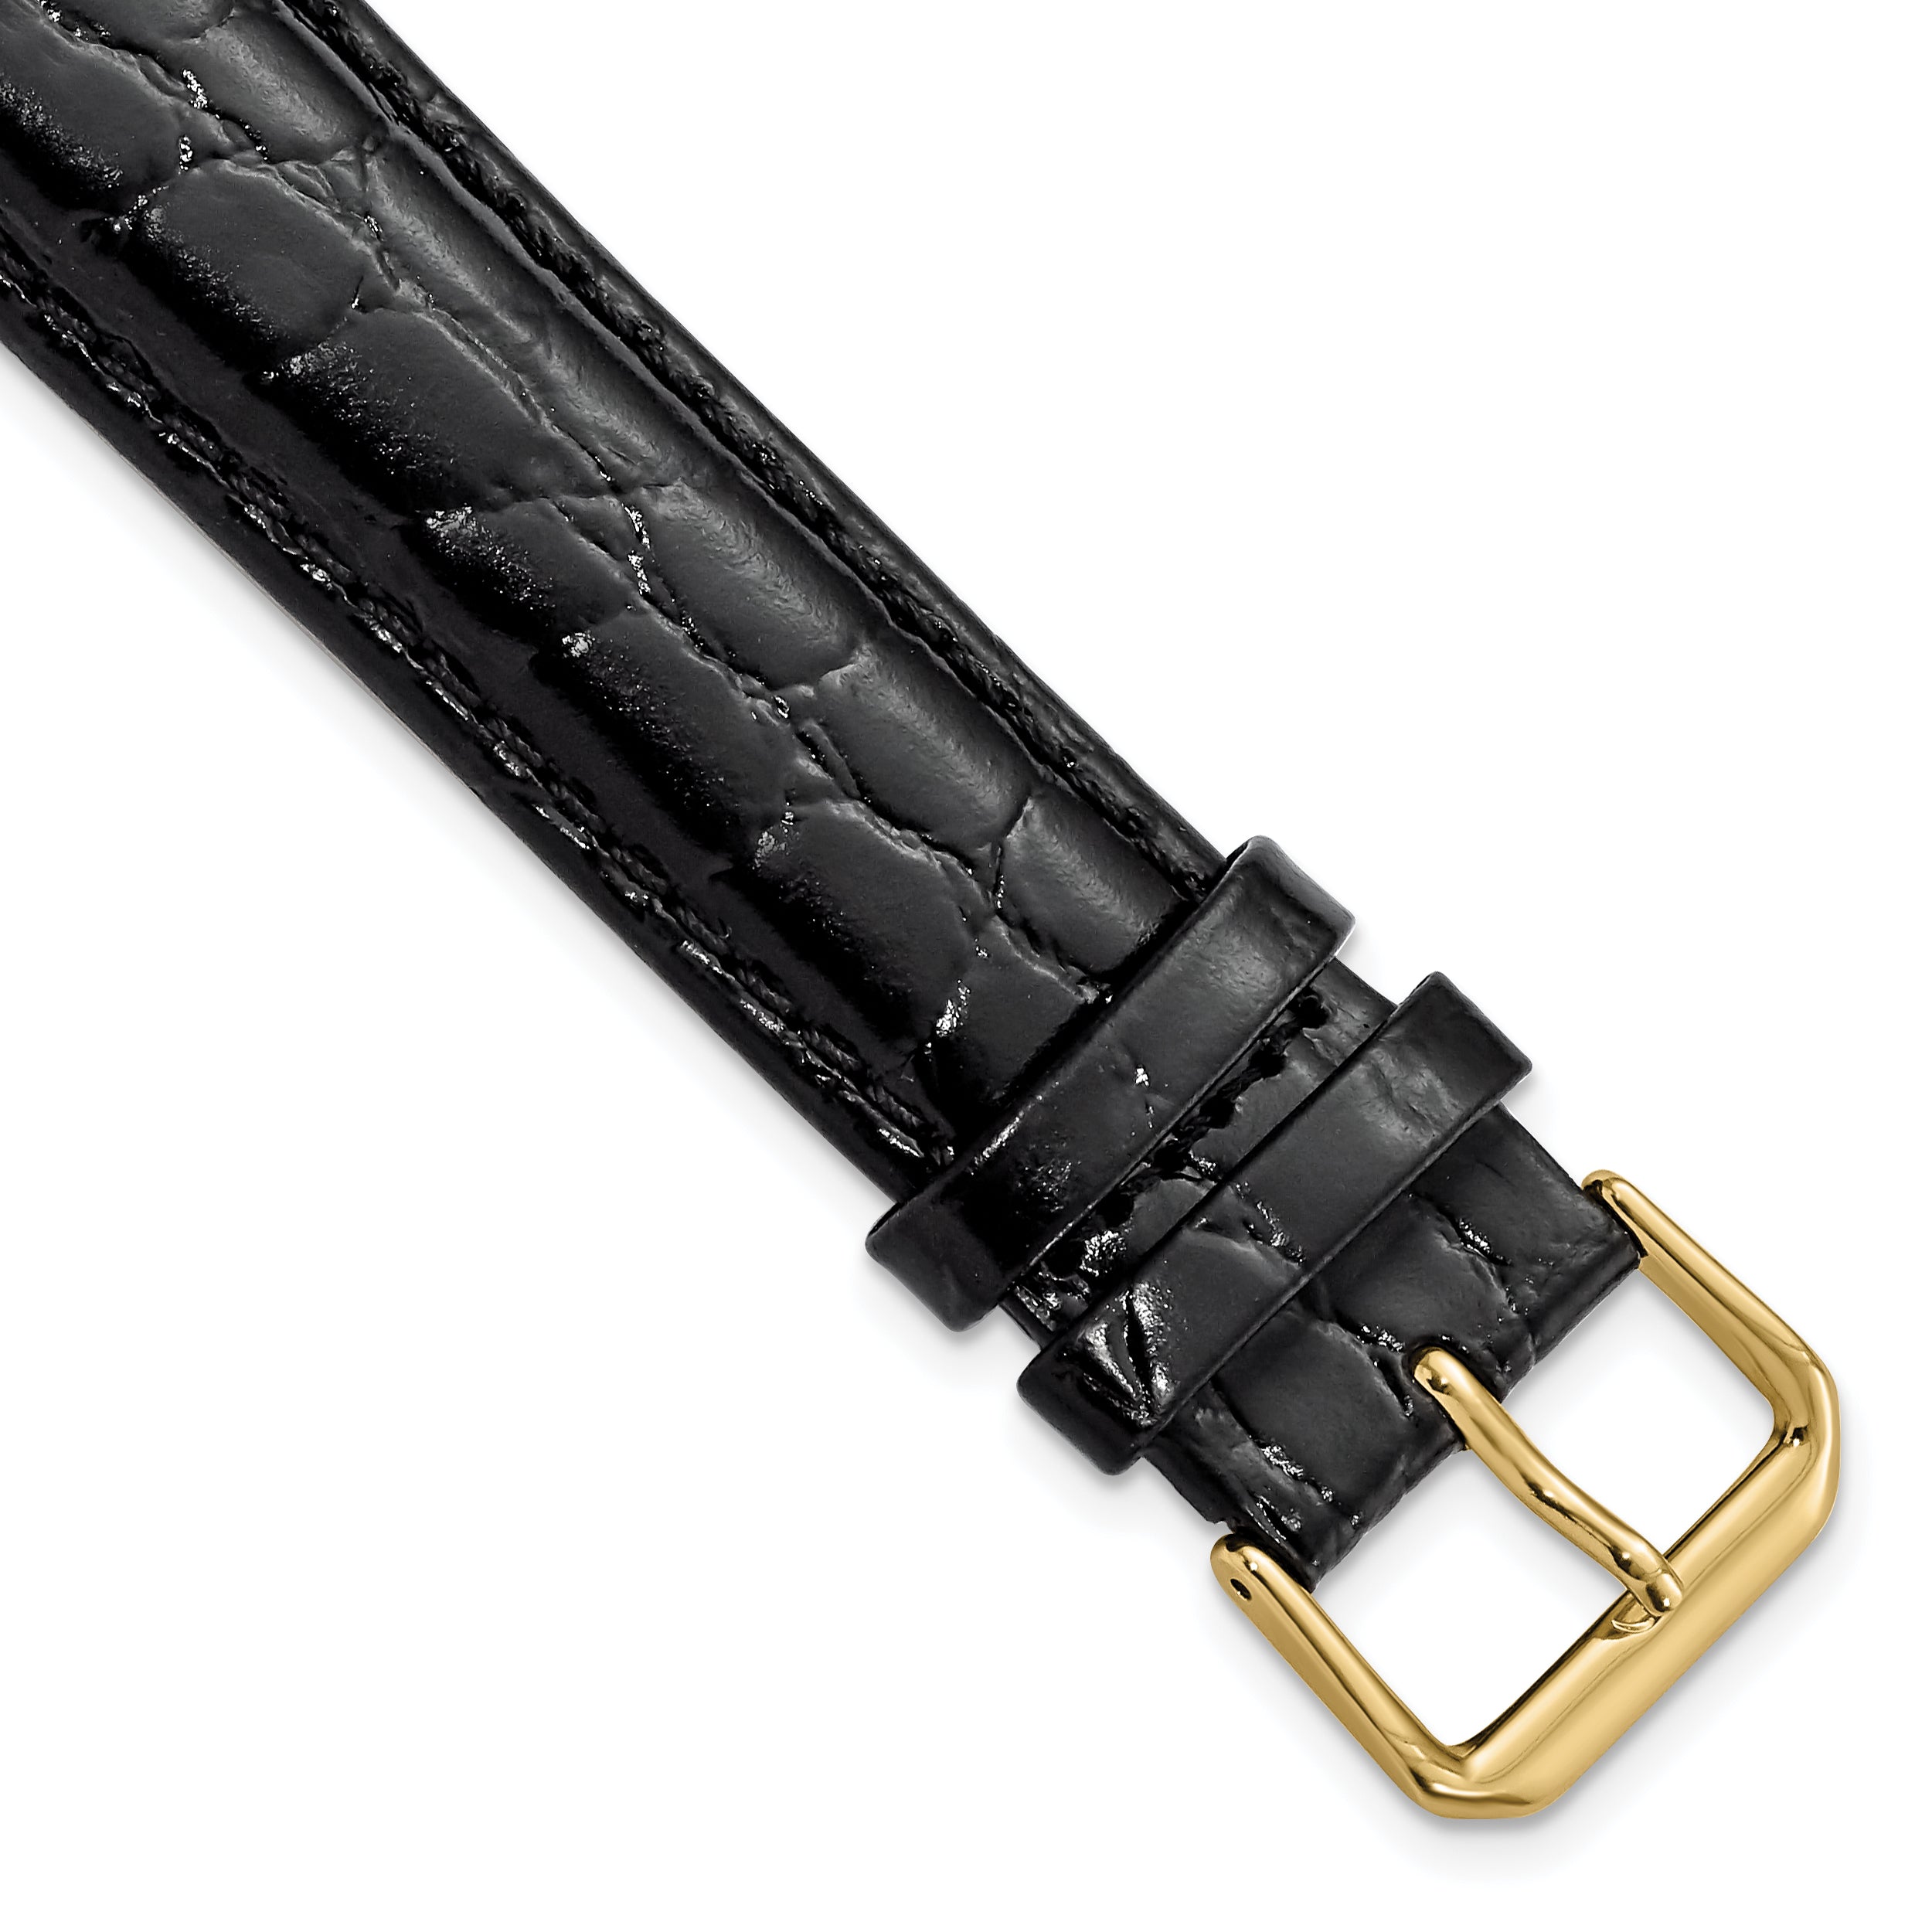 DeBeer 20mm Extra Long Black Alligator Grain Leather with Gold-tone Buckle 9.5 inch Watch Band